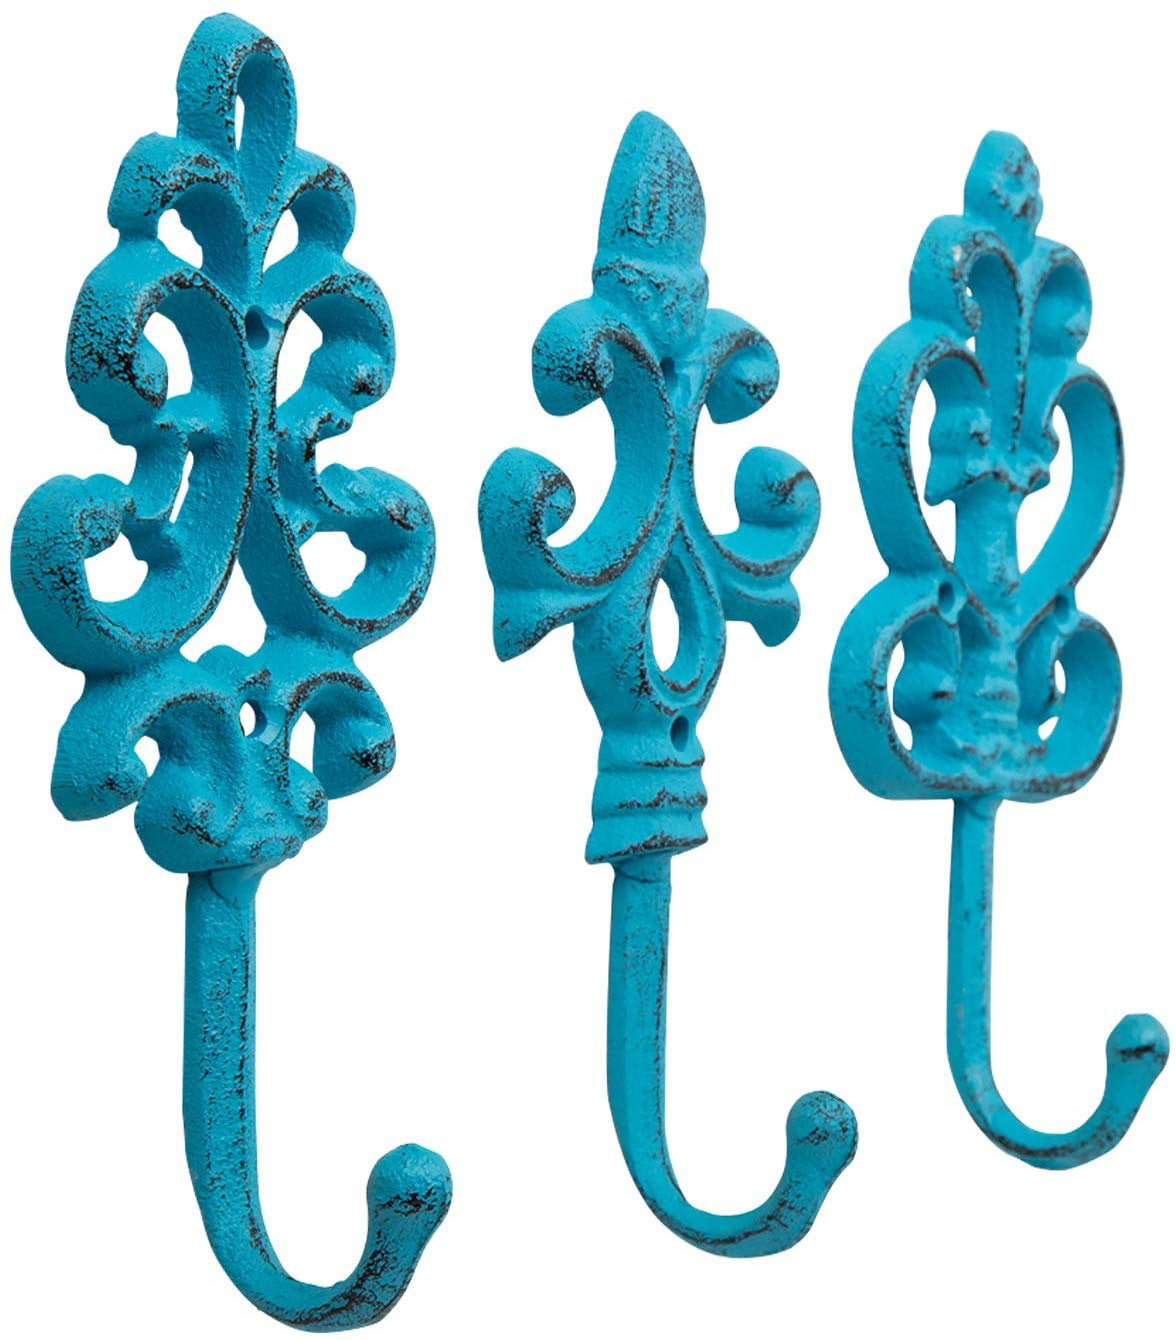 Wallcharmers Set of 3 Rustic Decorative Wall Hooks 8” | Victorian Shabby  Chic Fleur De Lis Antique Towel Hooks for Hanging | Gothic Cast Iron